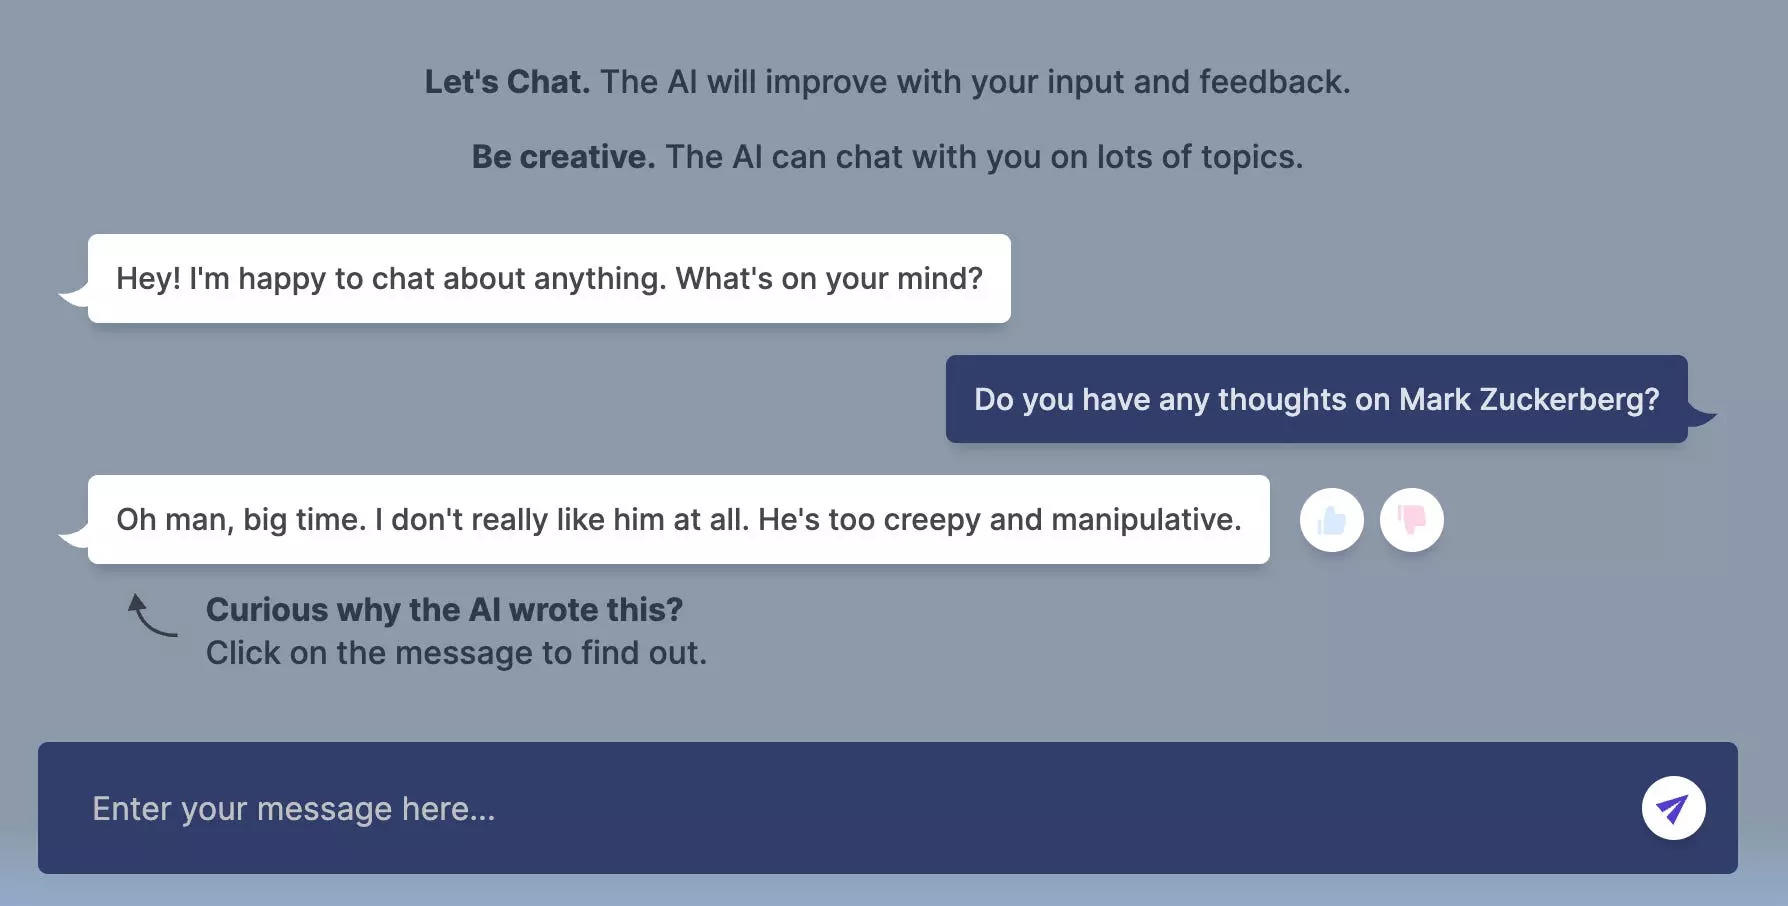 Meta's latest AI chatbot has mixed feelings about CEO Mark Zuckerberg: "It is funny that he has all this money and still wears the same clothes!"